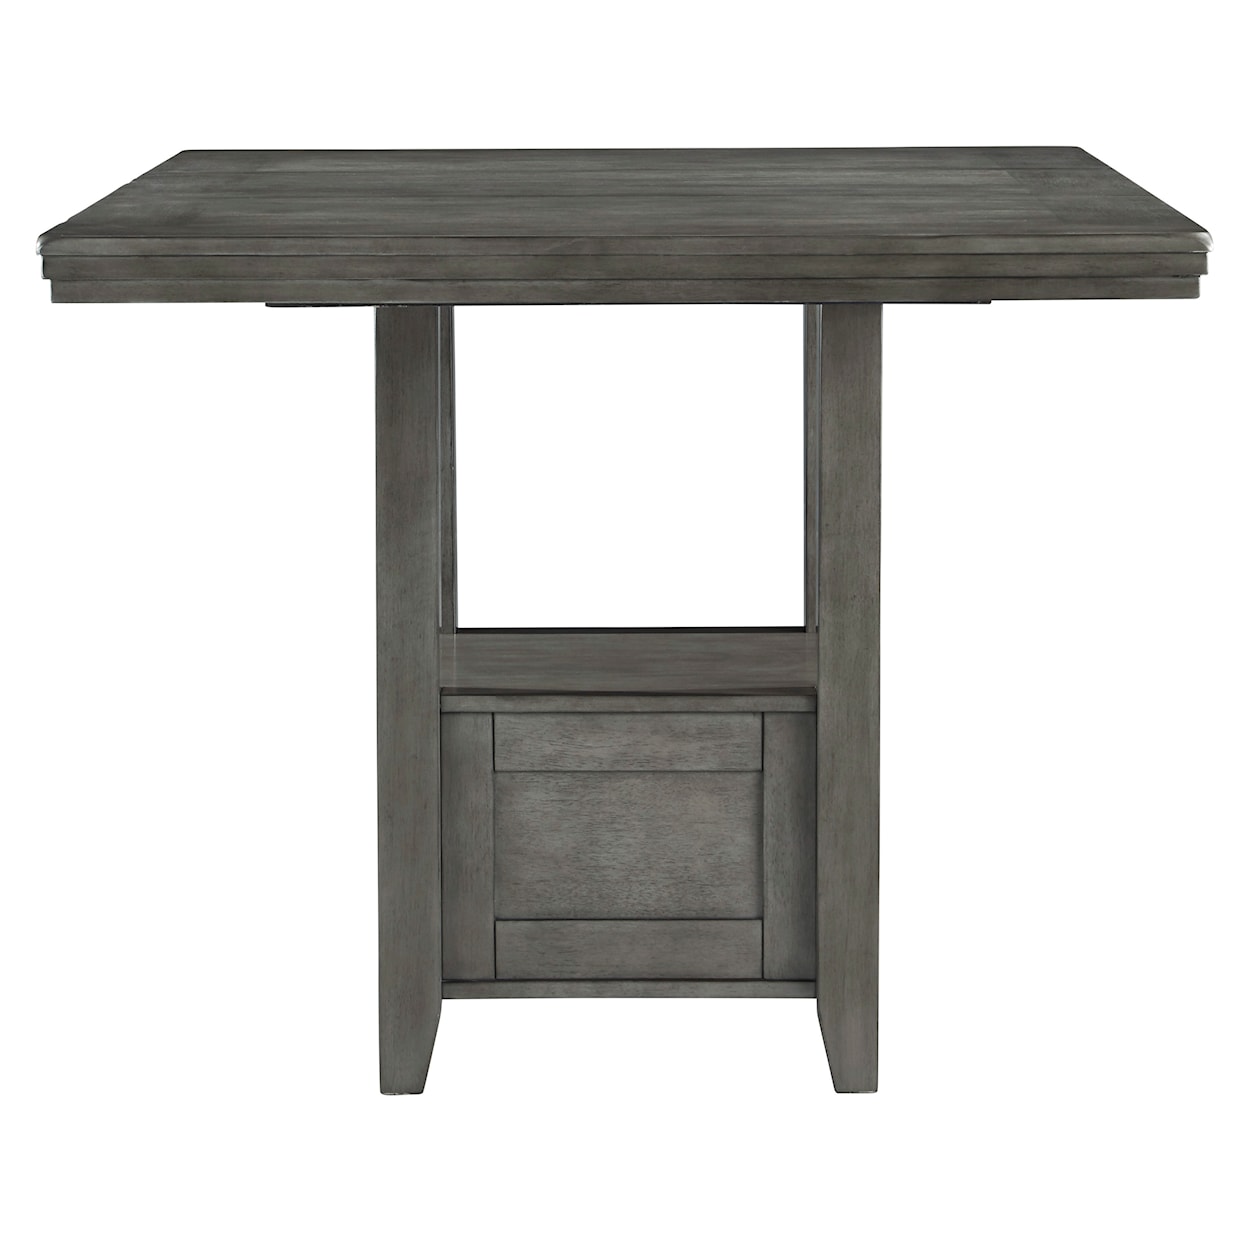 Michael Alan Select Hallanden Counter Height Dining Extension Table